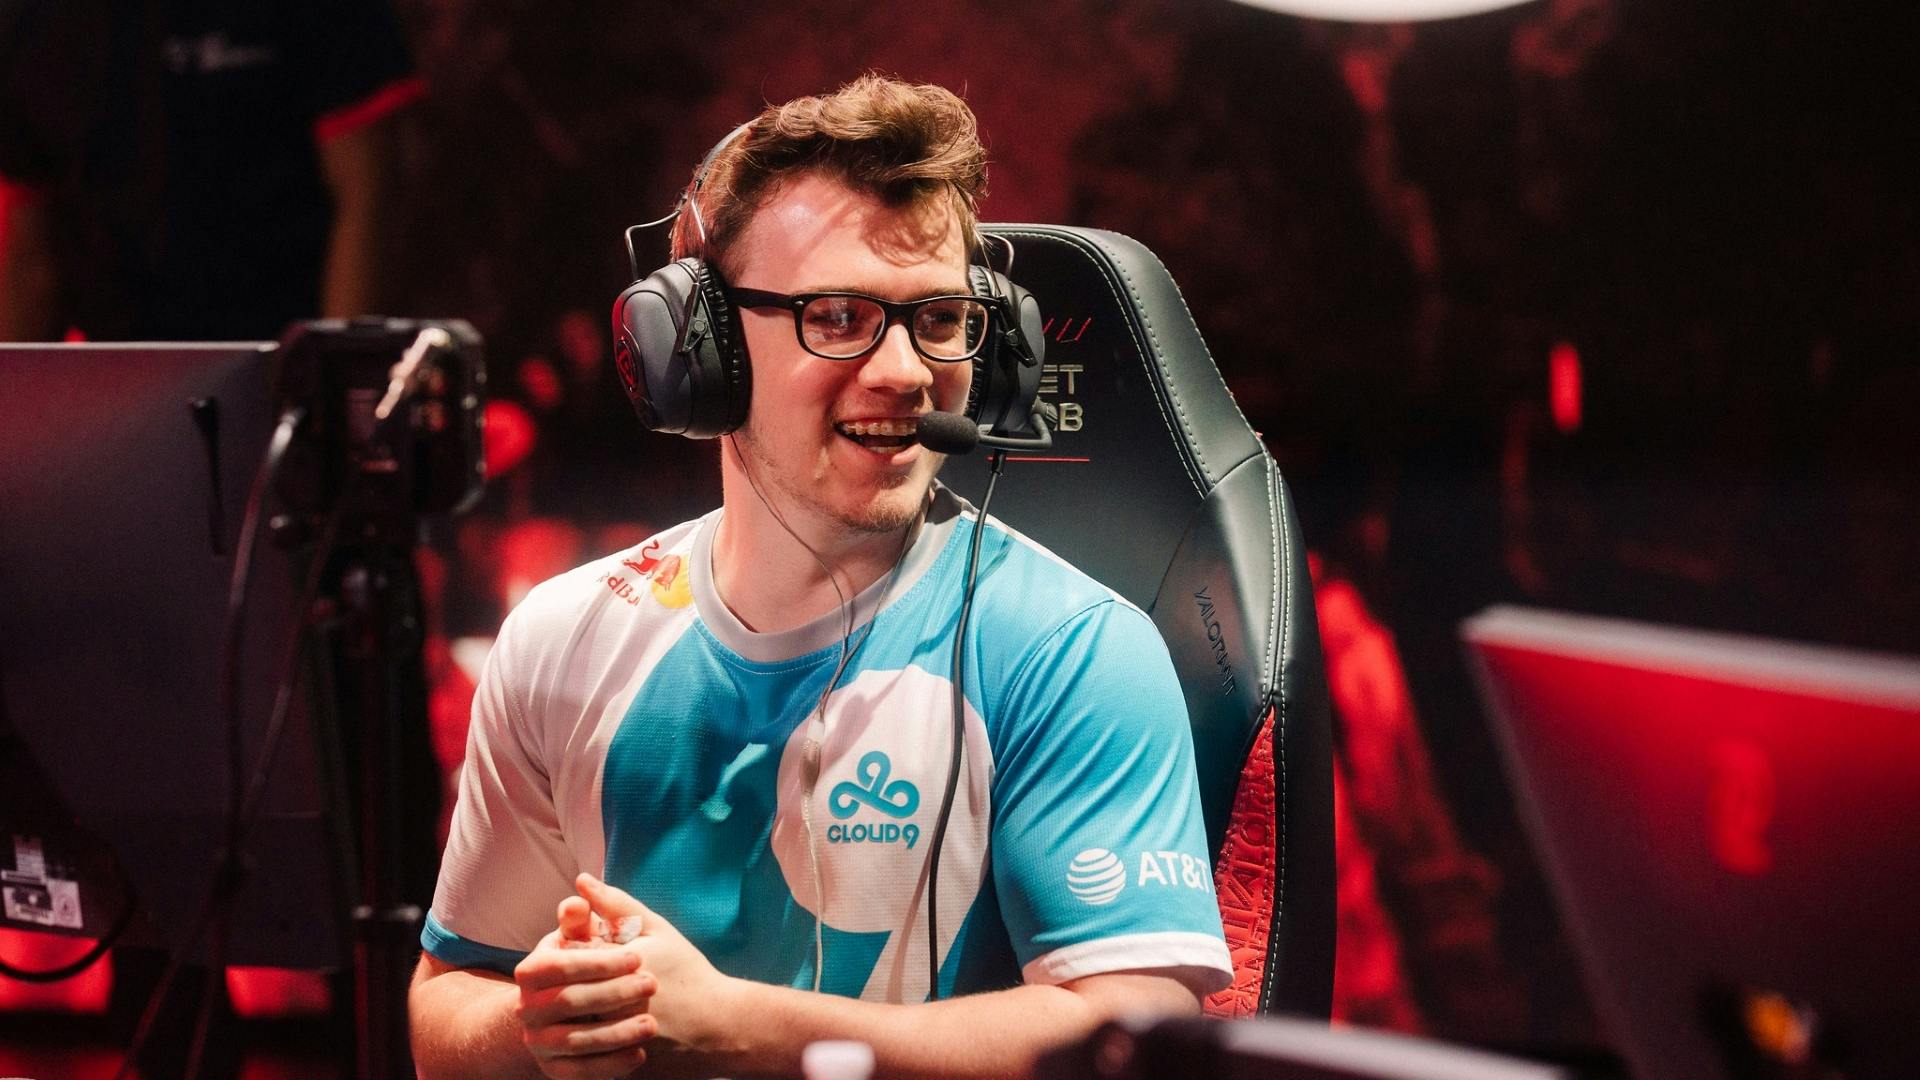 "Im not comfortable. Making playoffs means nothing. We could be undefeated right now, and be having the same conversation" Zellsis on his mentality